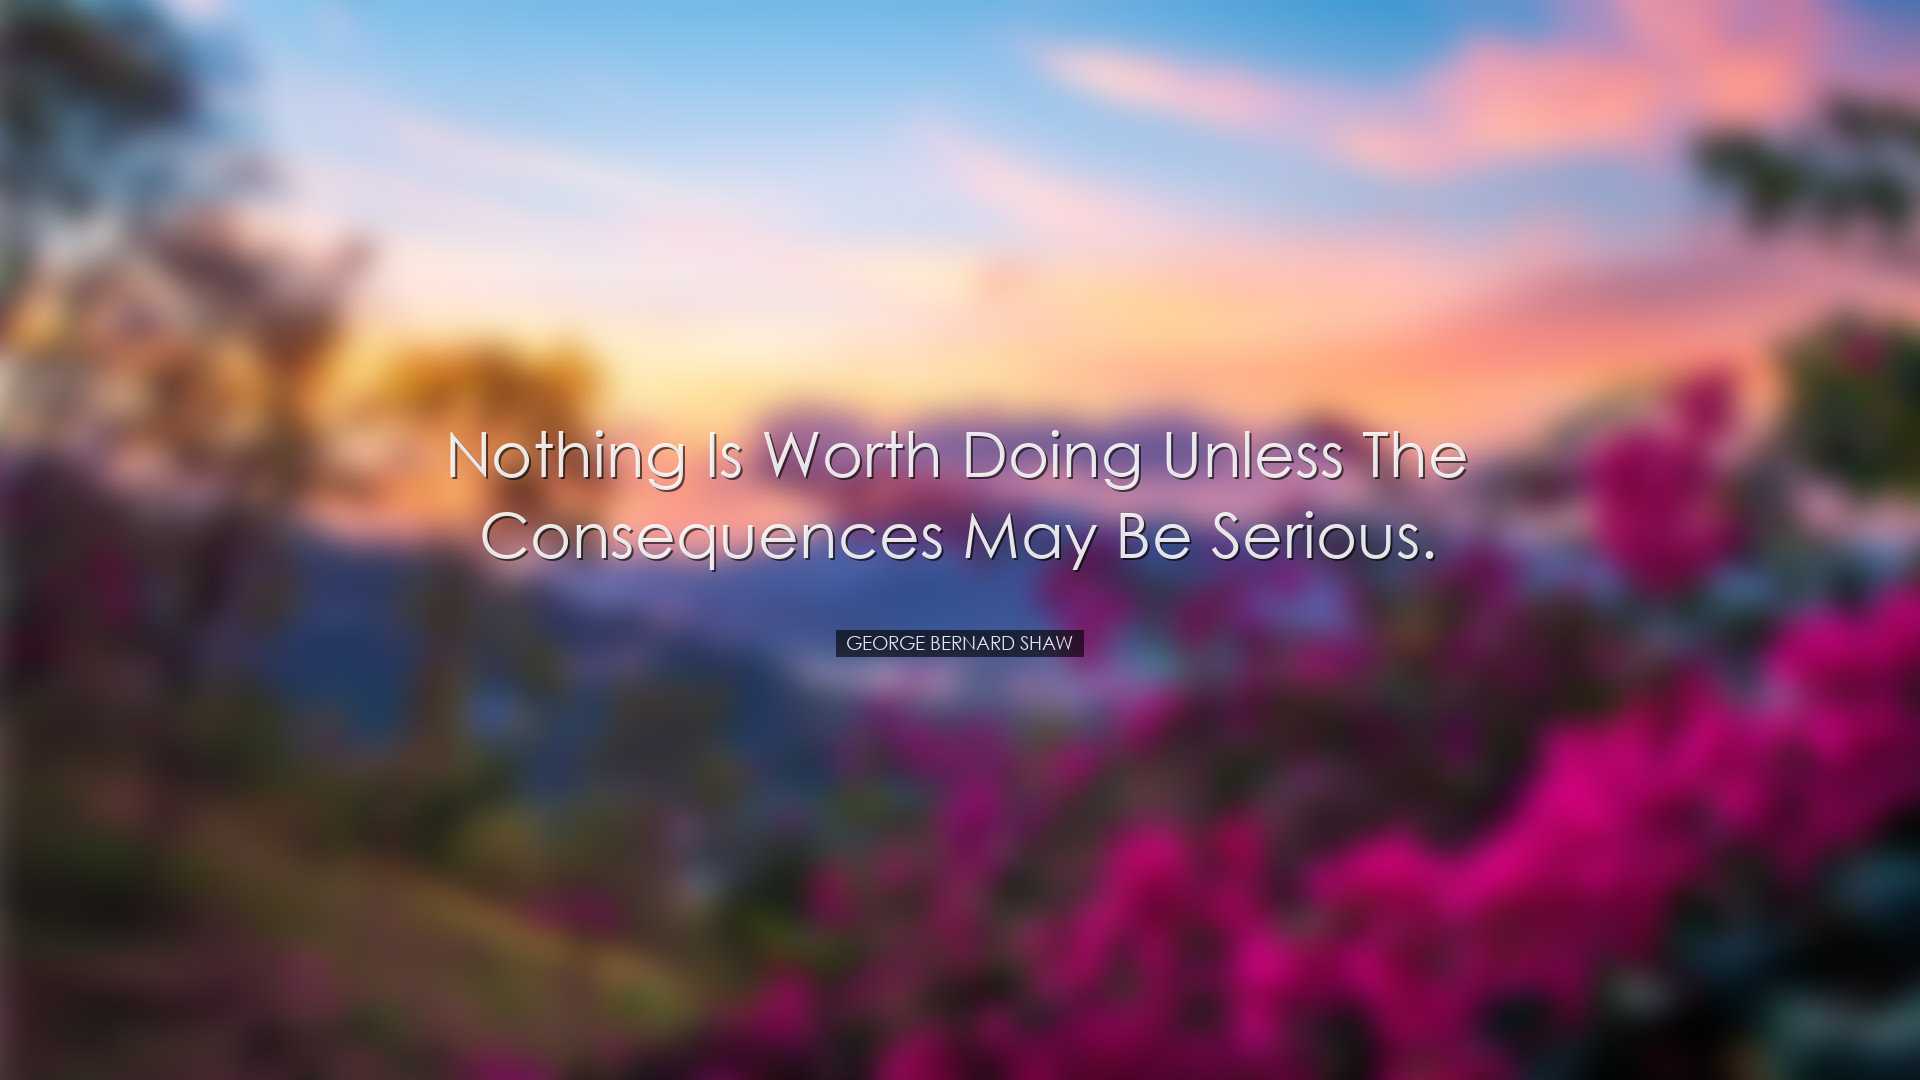 Nothing is worth doing unless the consequences may be serious. - G